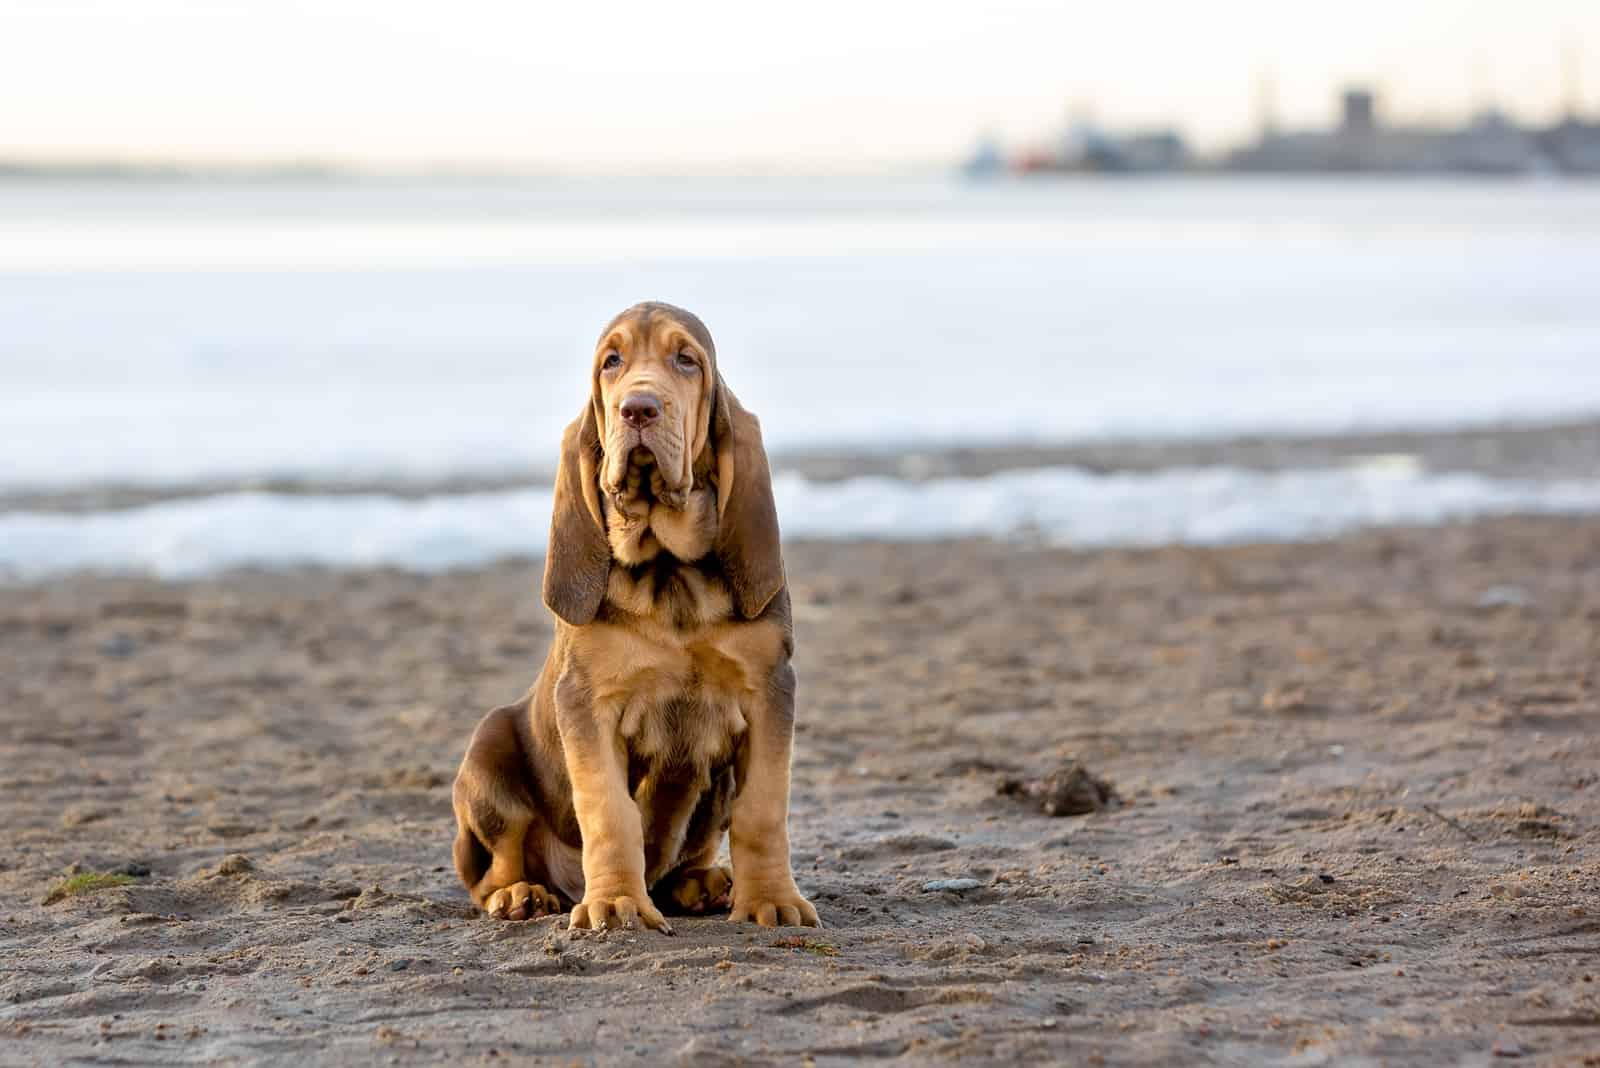 bloodhound is a mixed breed